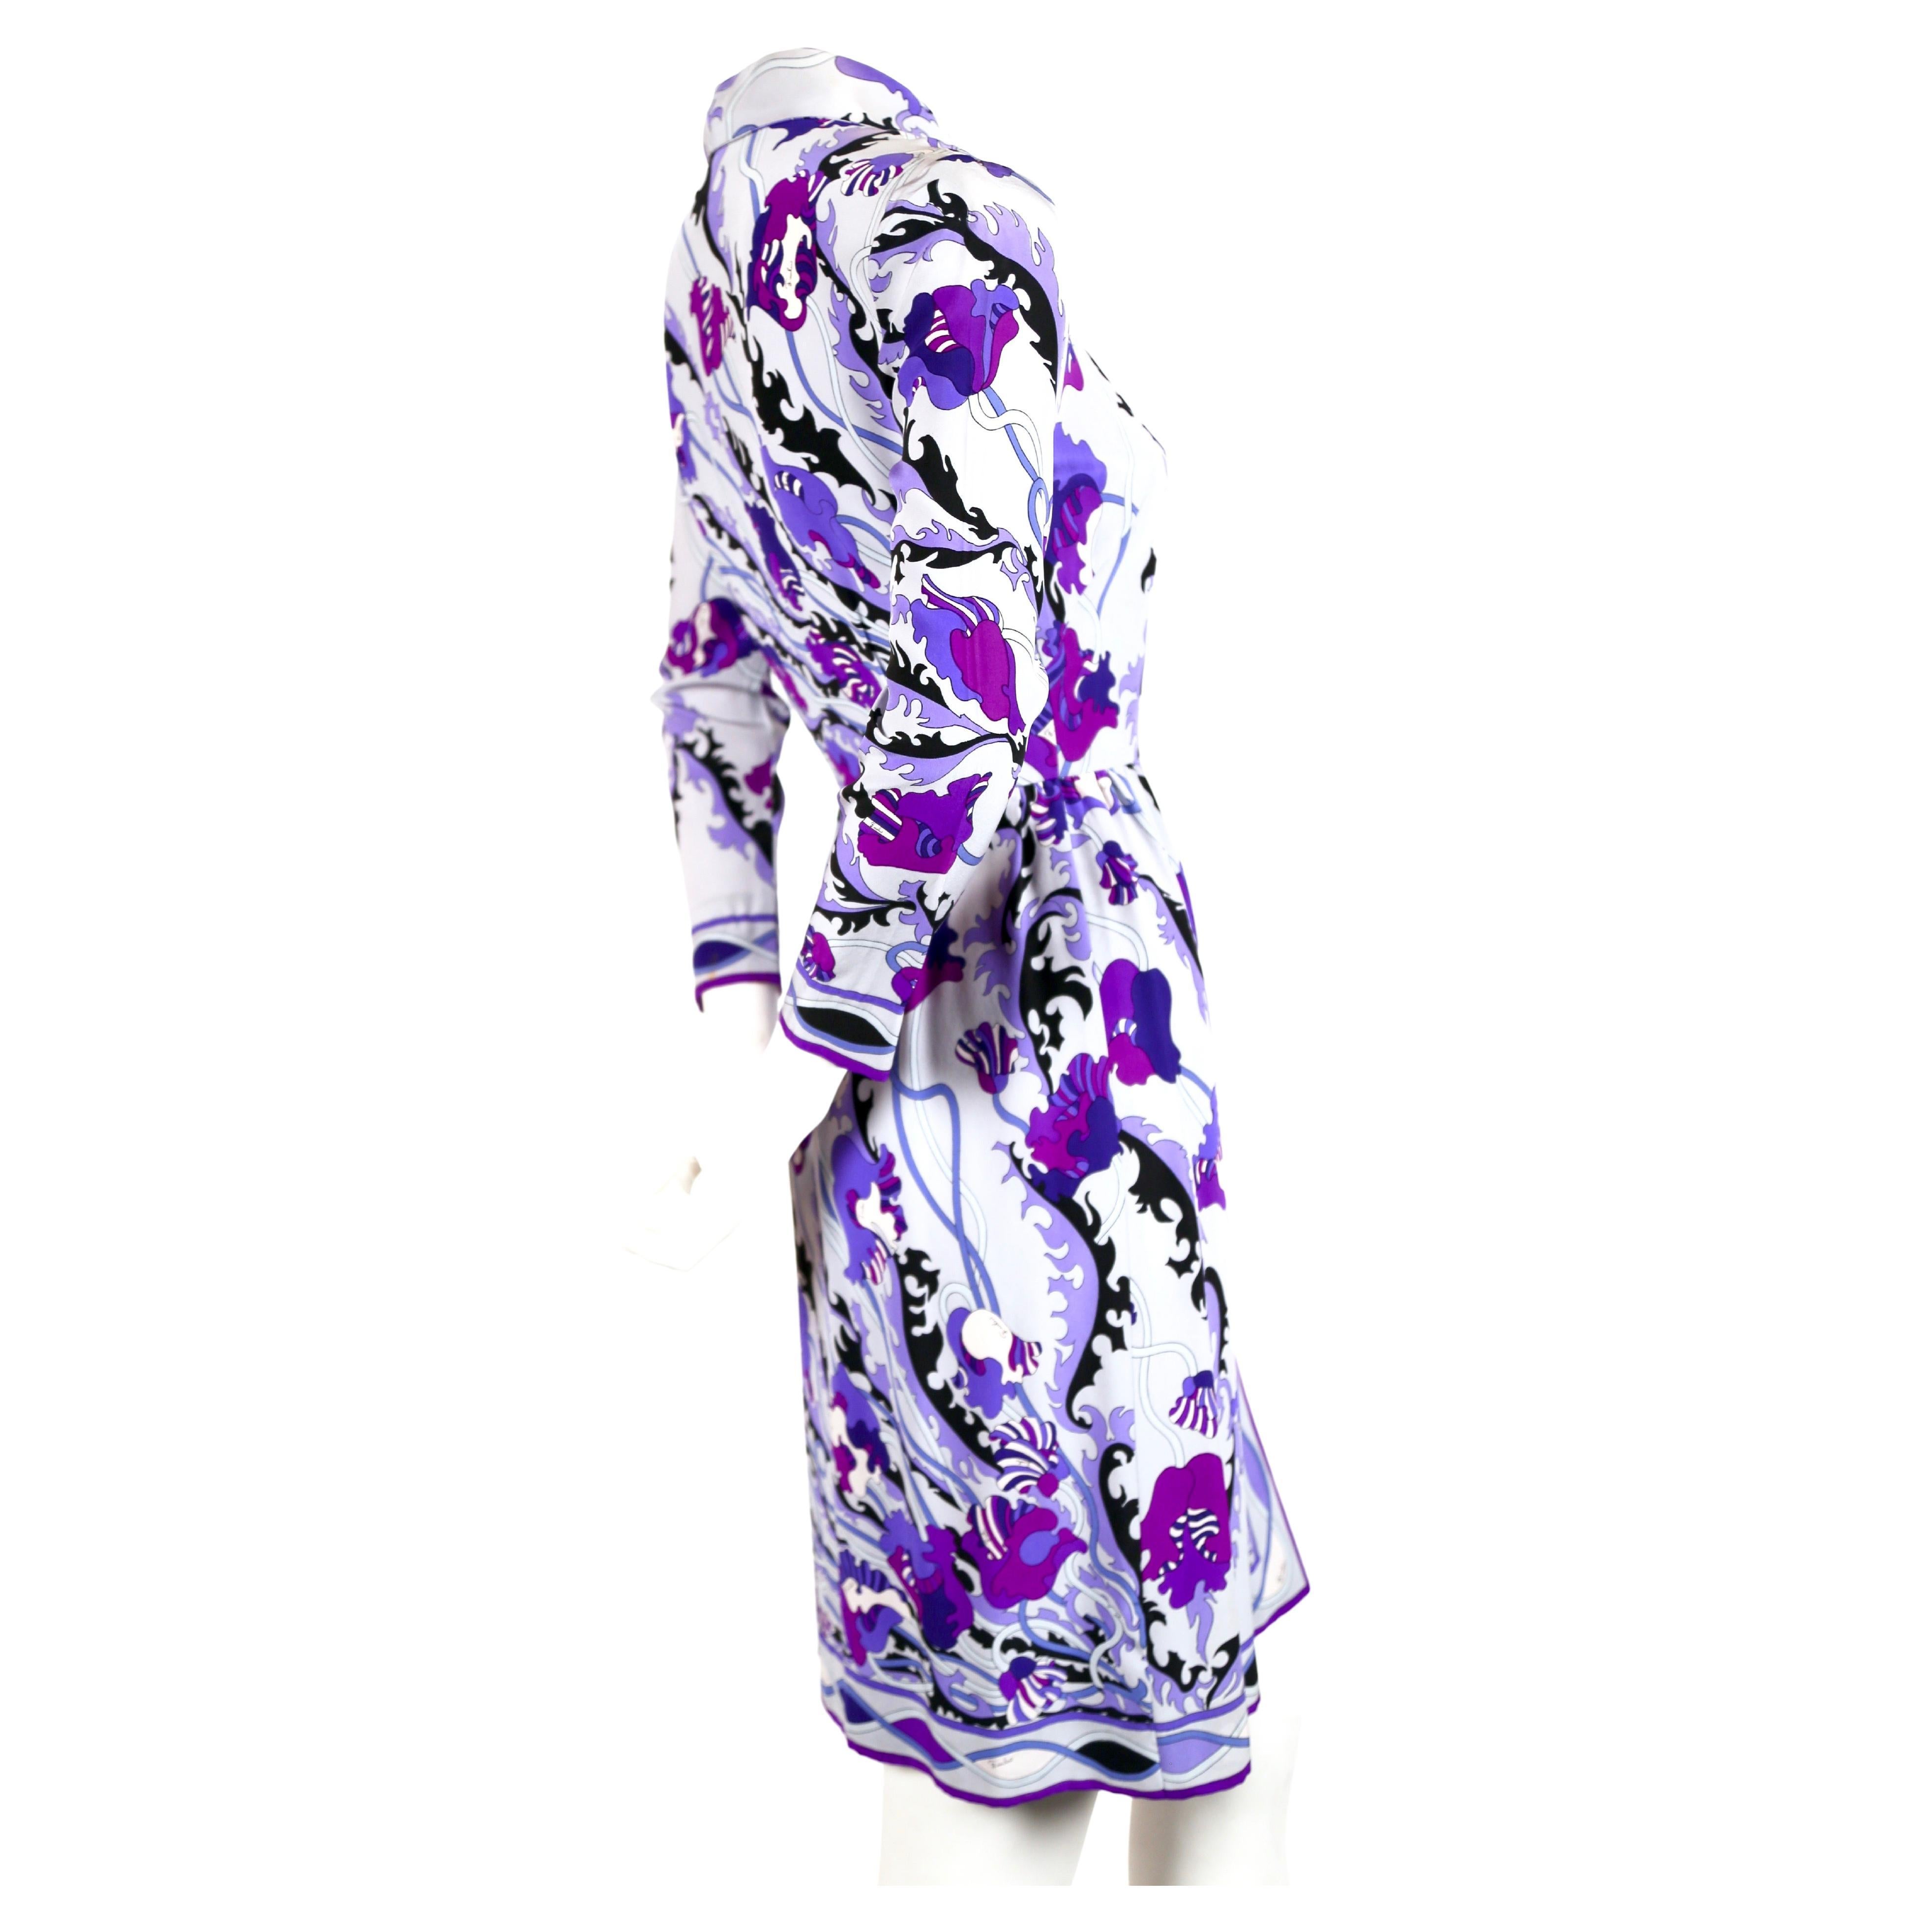 Vibrant, floral printed silk dress by Emilio Pucci dating to the 1960's. Beautiful color scheme in tones of blue, purple with black accents. Snap closure at front. Fits a US 2. Bust measures approximately 34